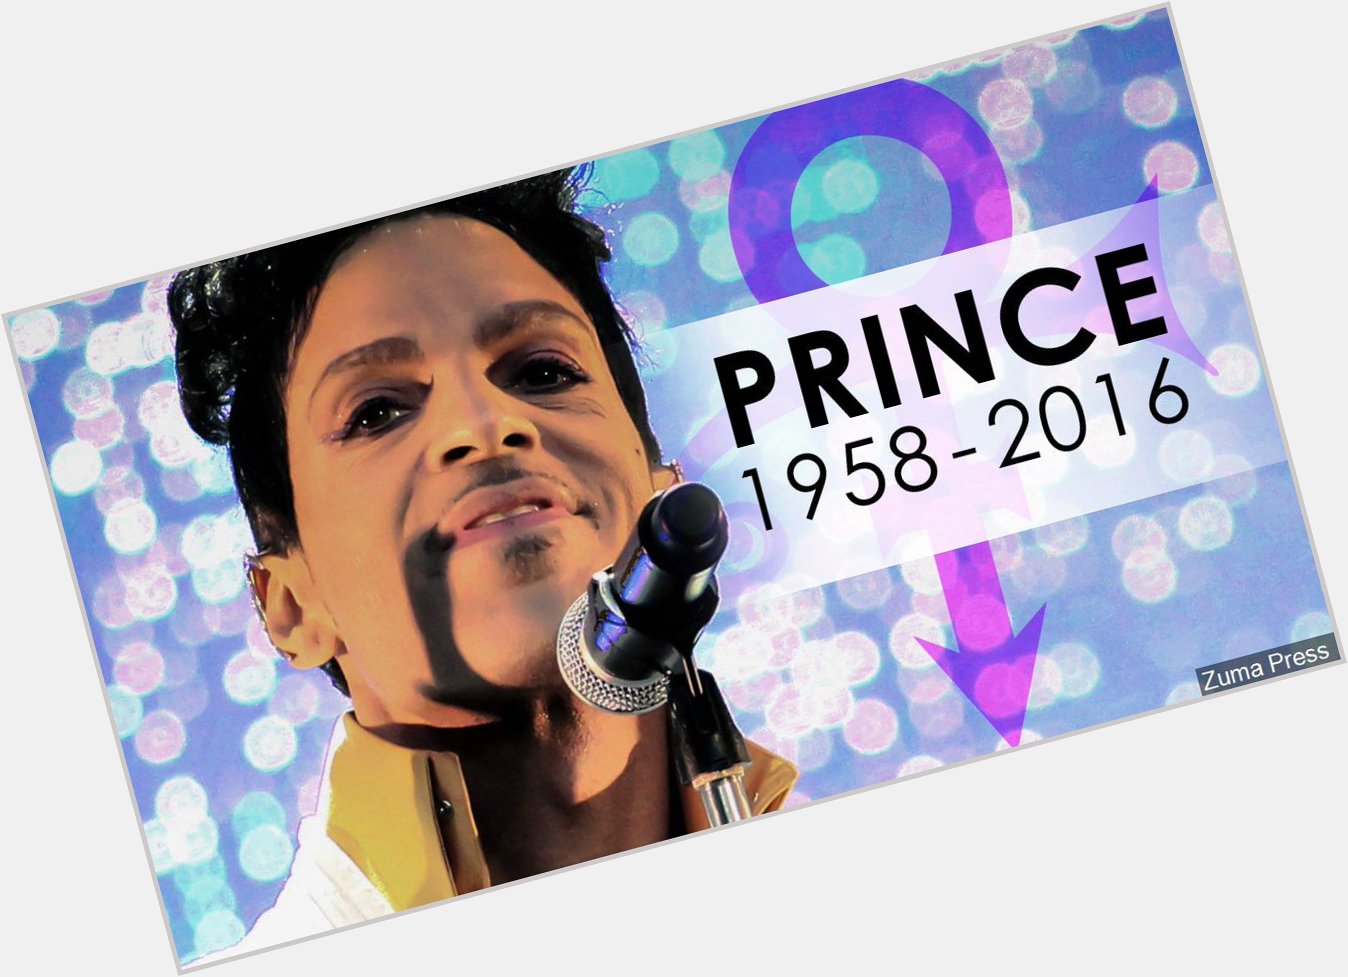 Happy Birthday, Prince! The iconic singer was born on June 7 in 1958. What is your favorite Prince song? 